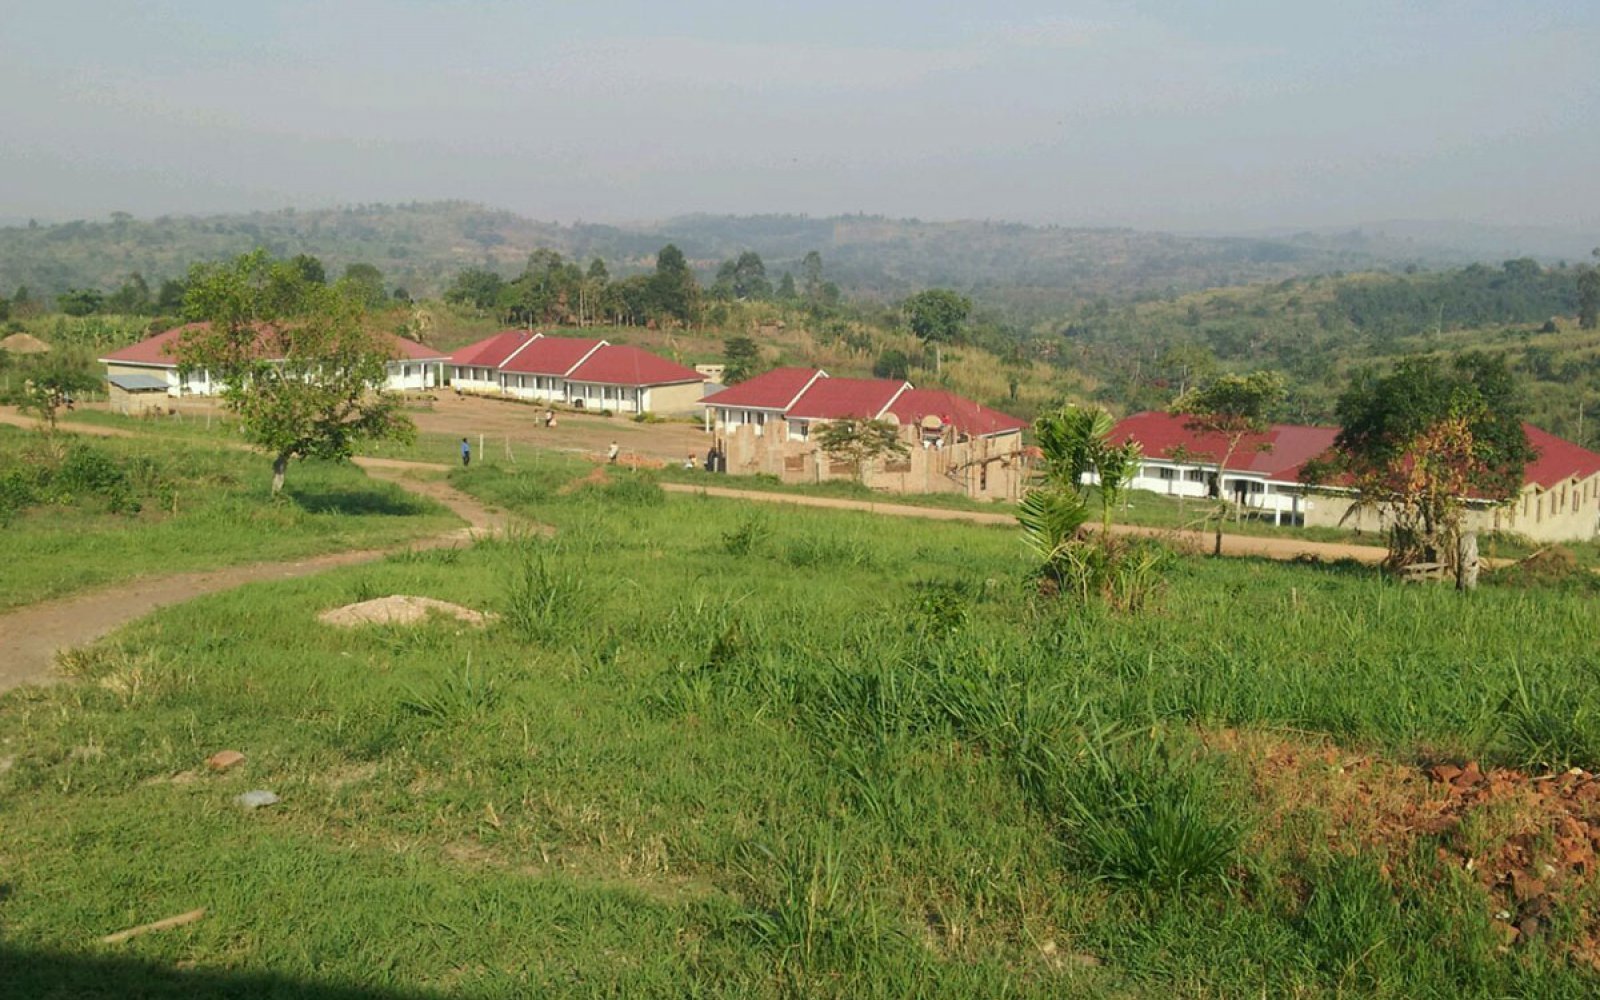 The buildings of the Kagoma Trade School from up on the hill